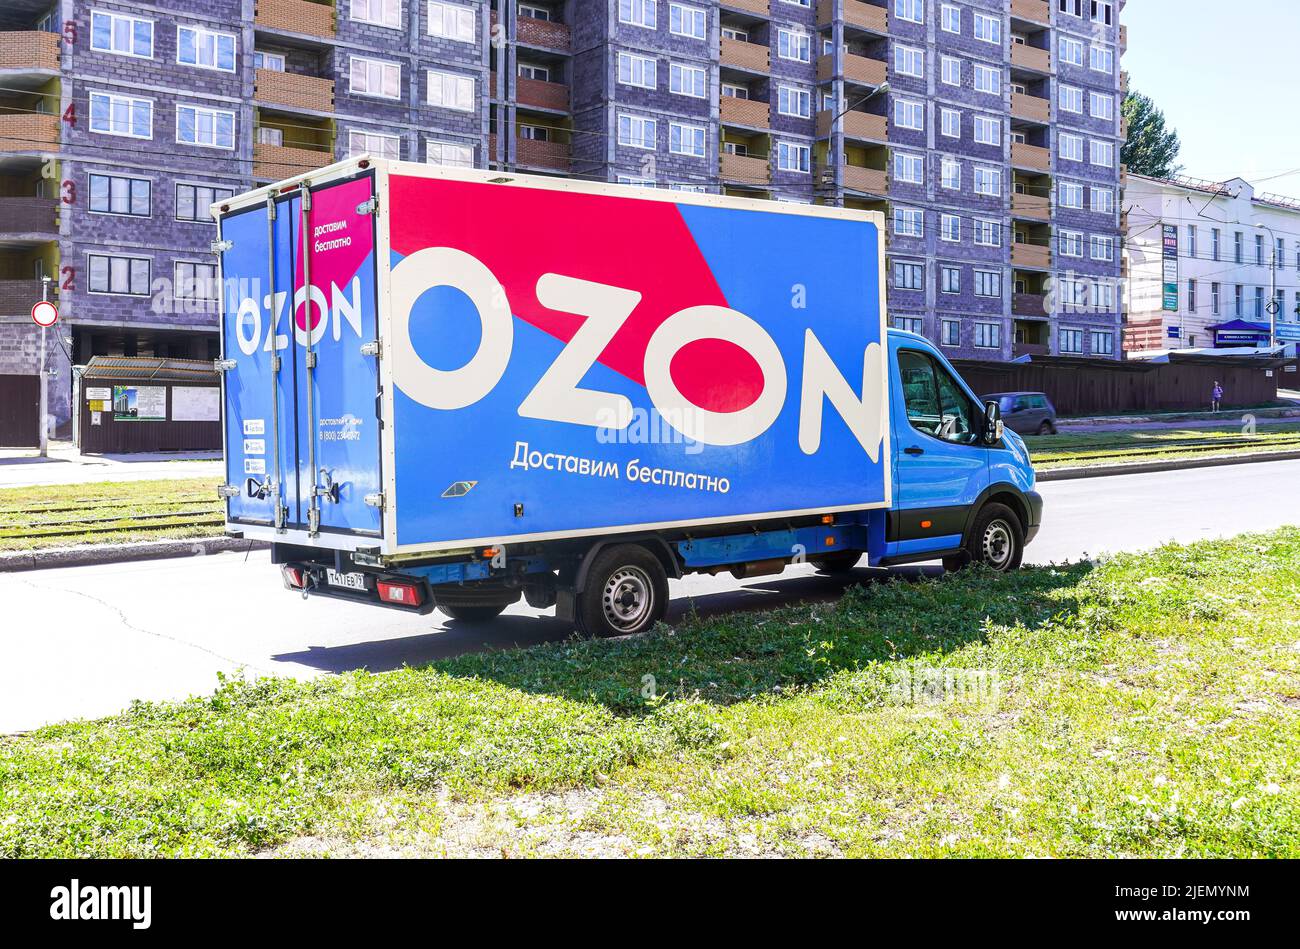 Samara, Russia - June 26, 2022: Branded cargo van of a Russian online marketplace Ozon. Delivery vehicle of goods from the Ozon online store Stock Photo